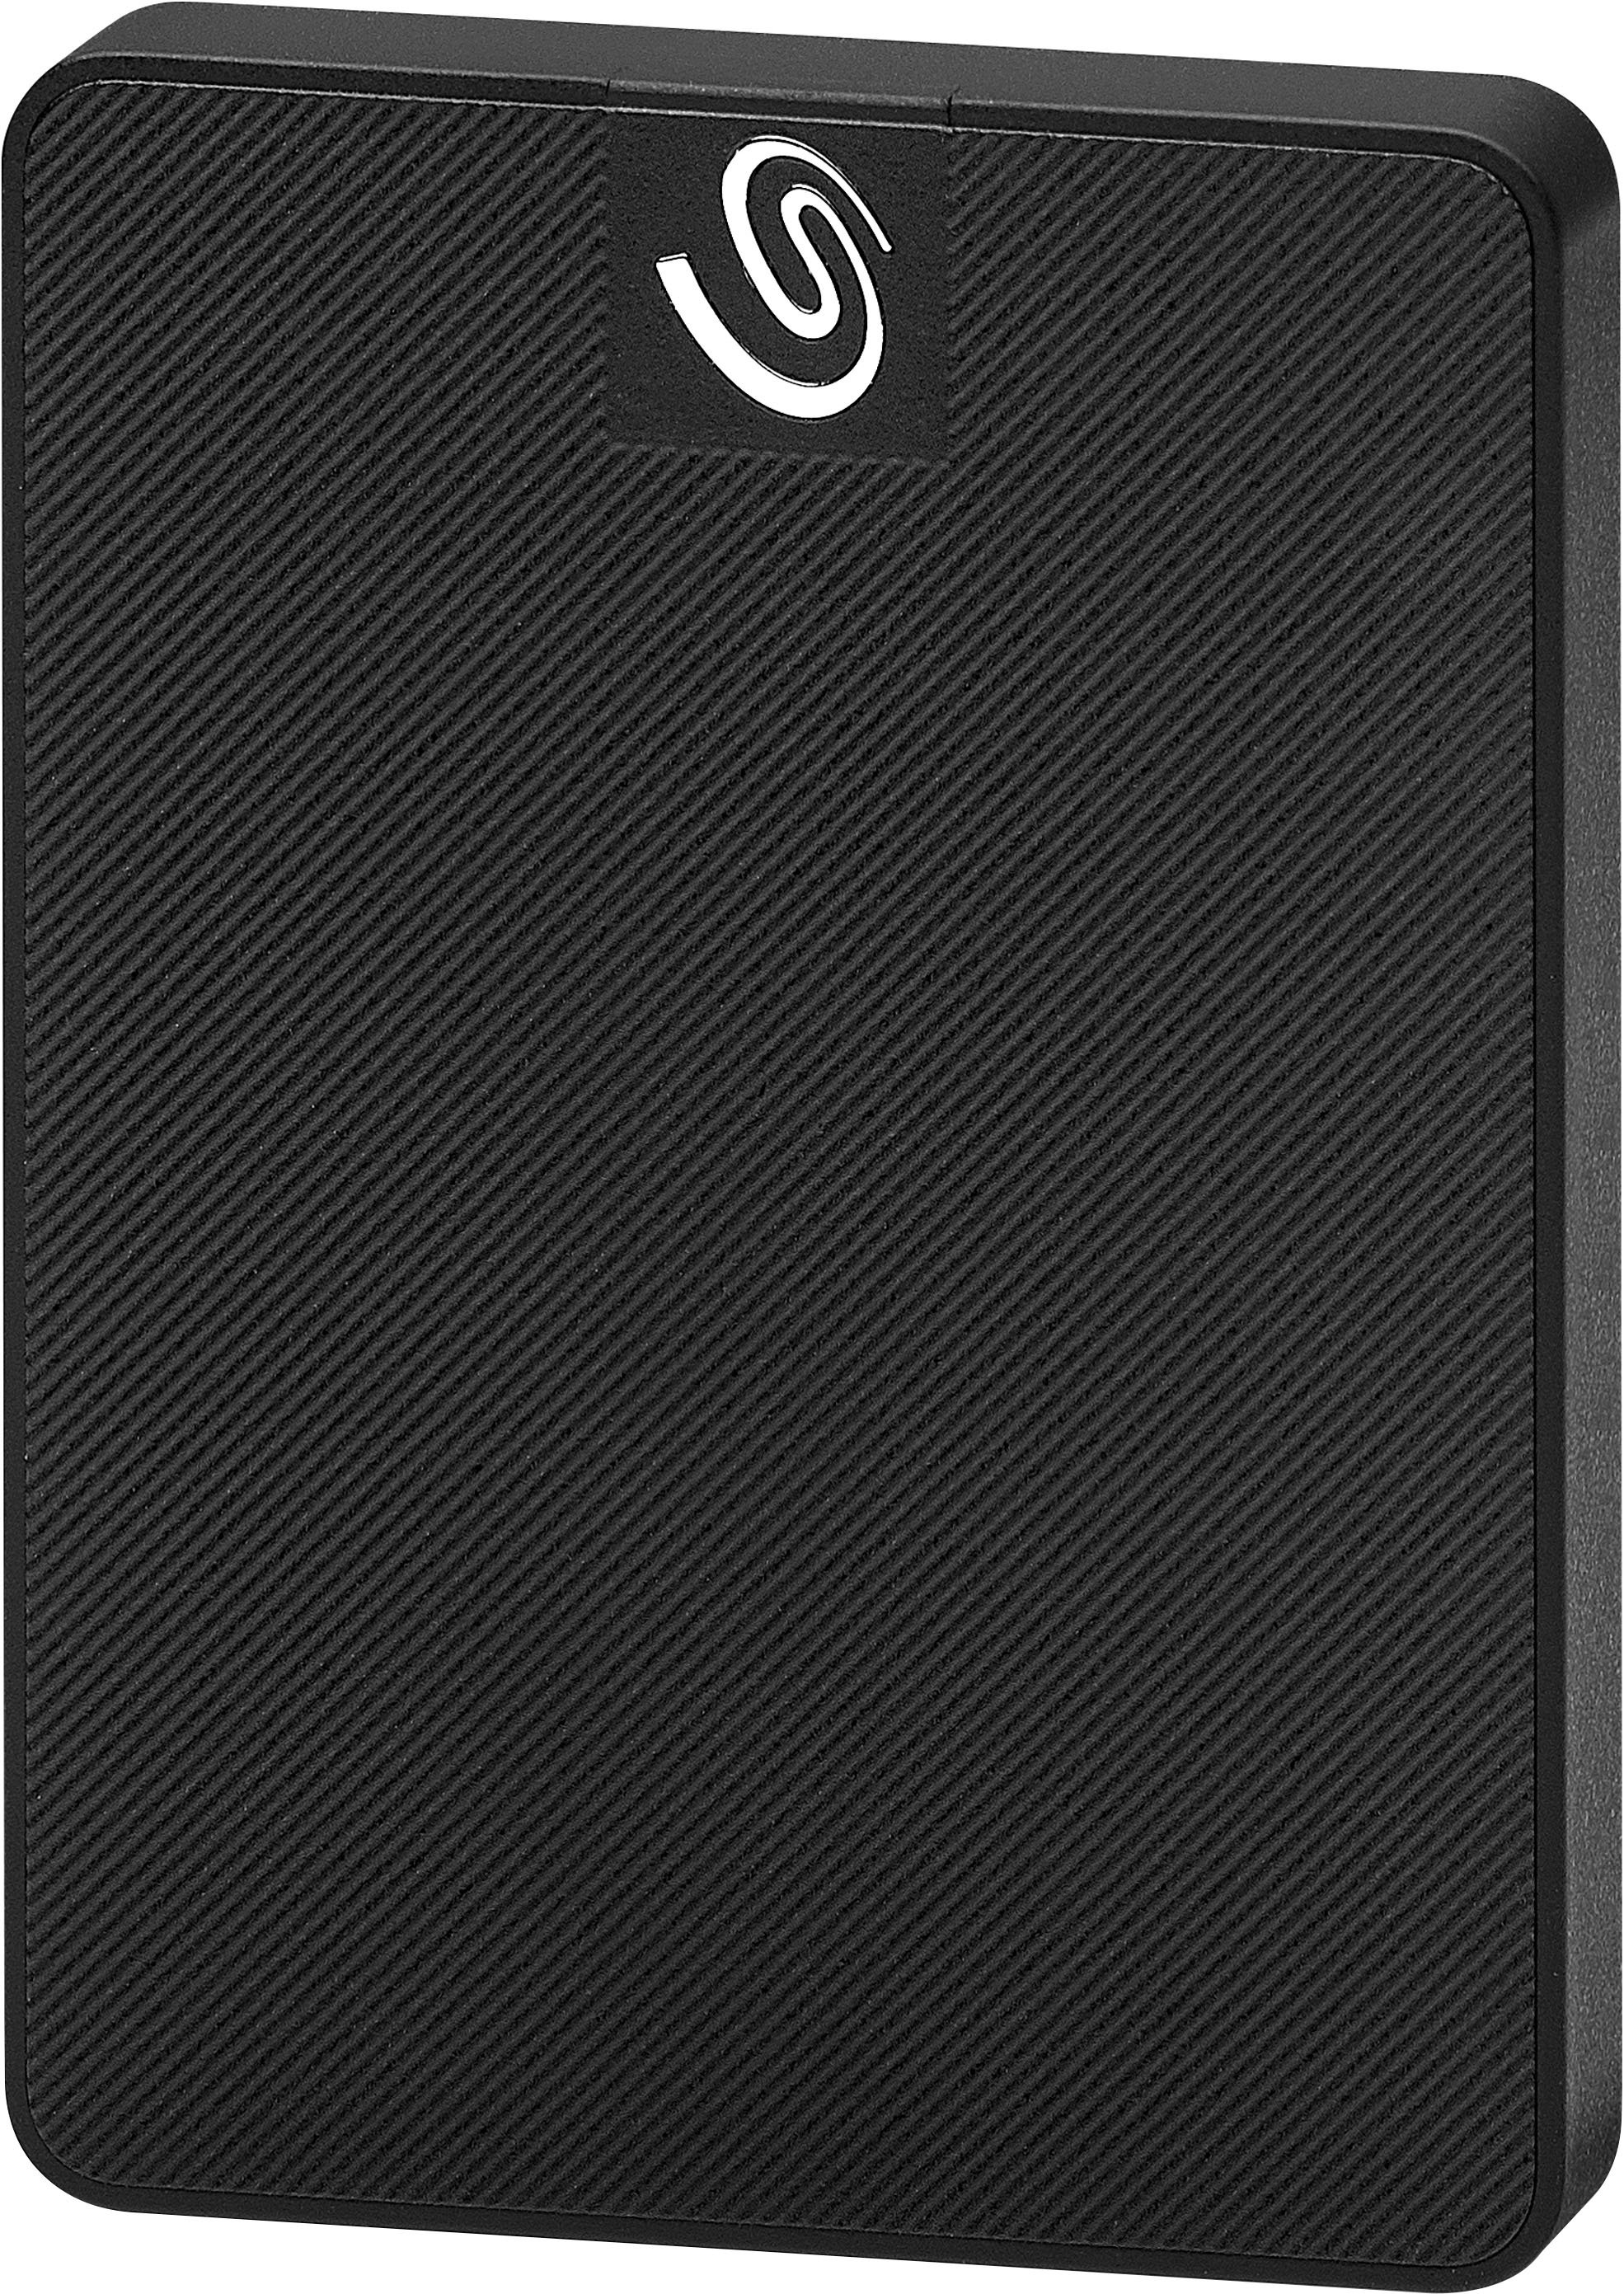 Angle View: Seagate - Expansion 2TB External USB-C and USB 3.0 Portable SSD with Rescue Data Recovery Services